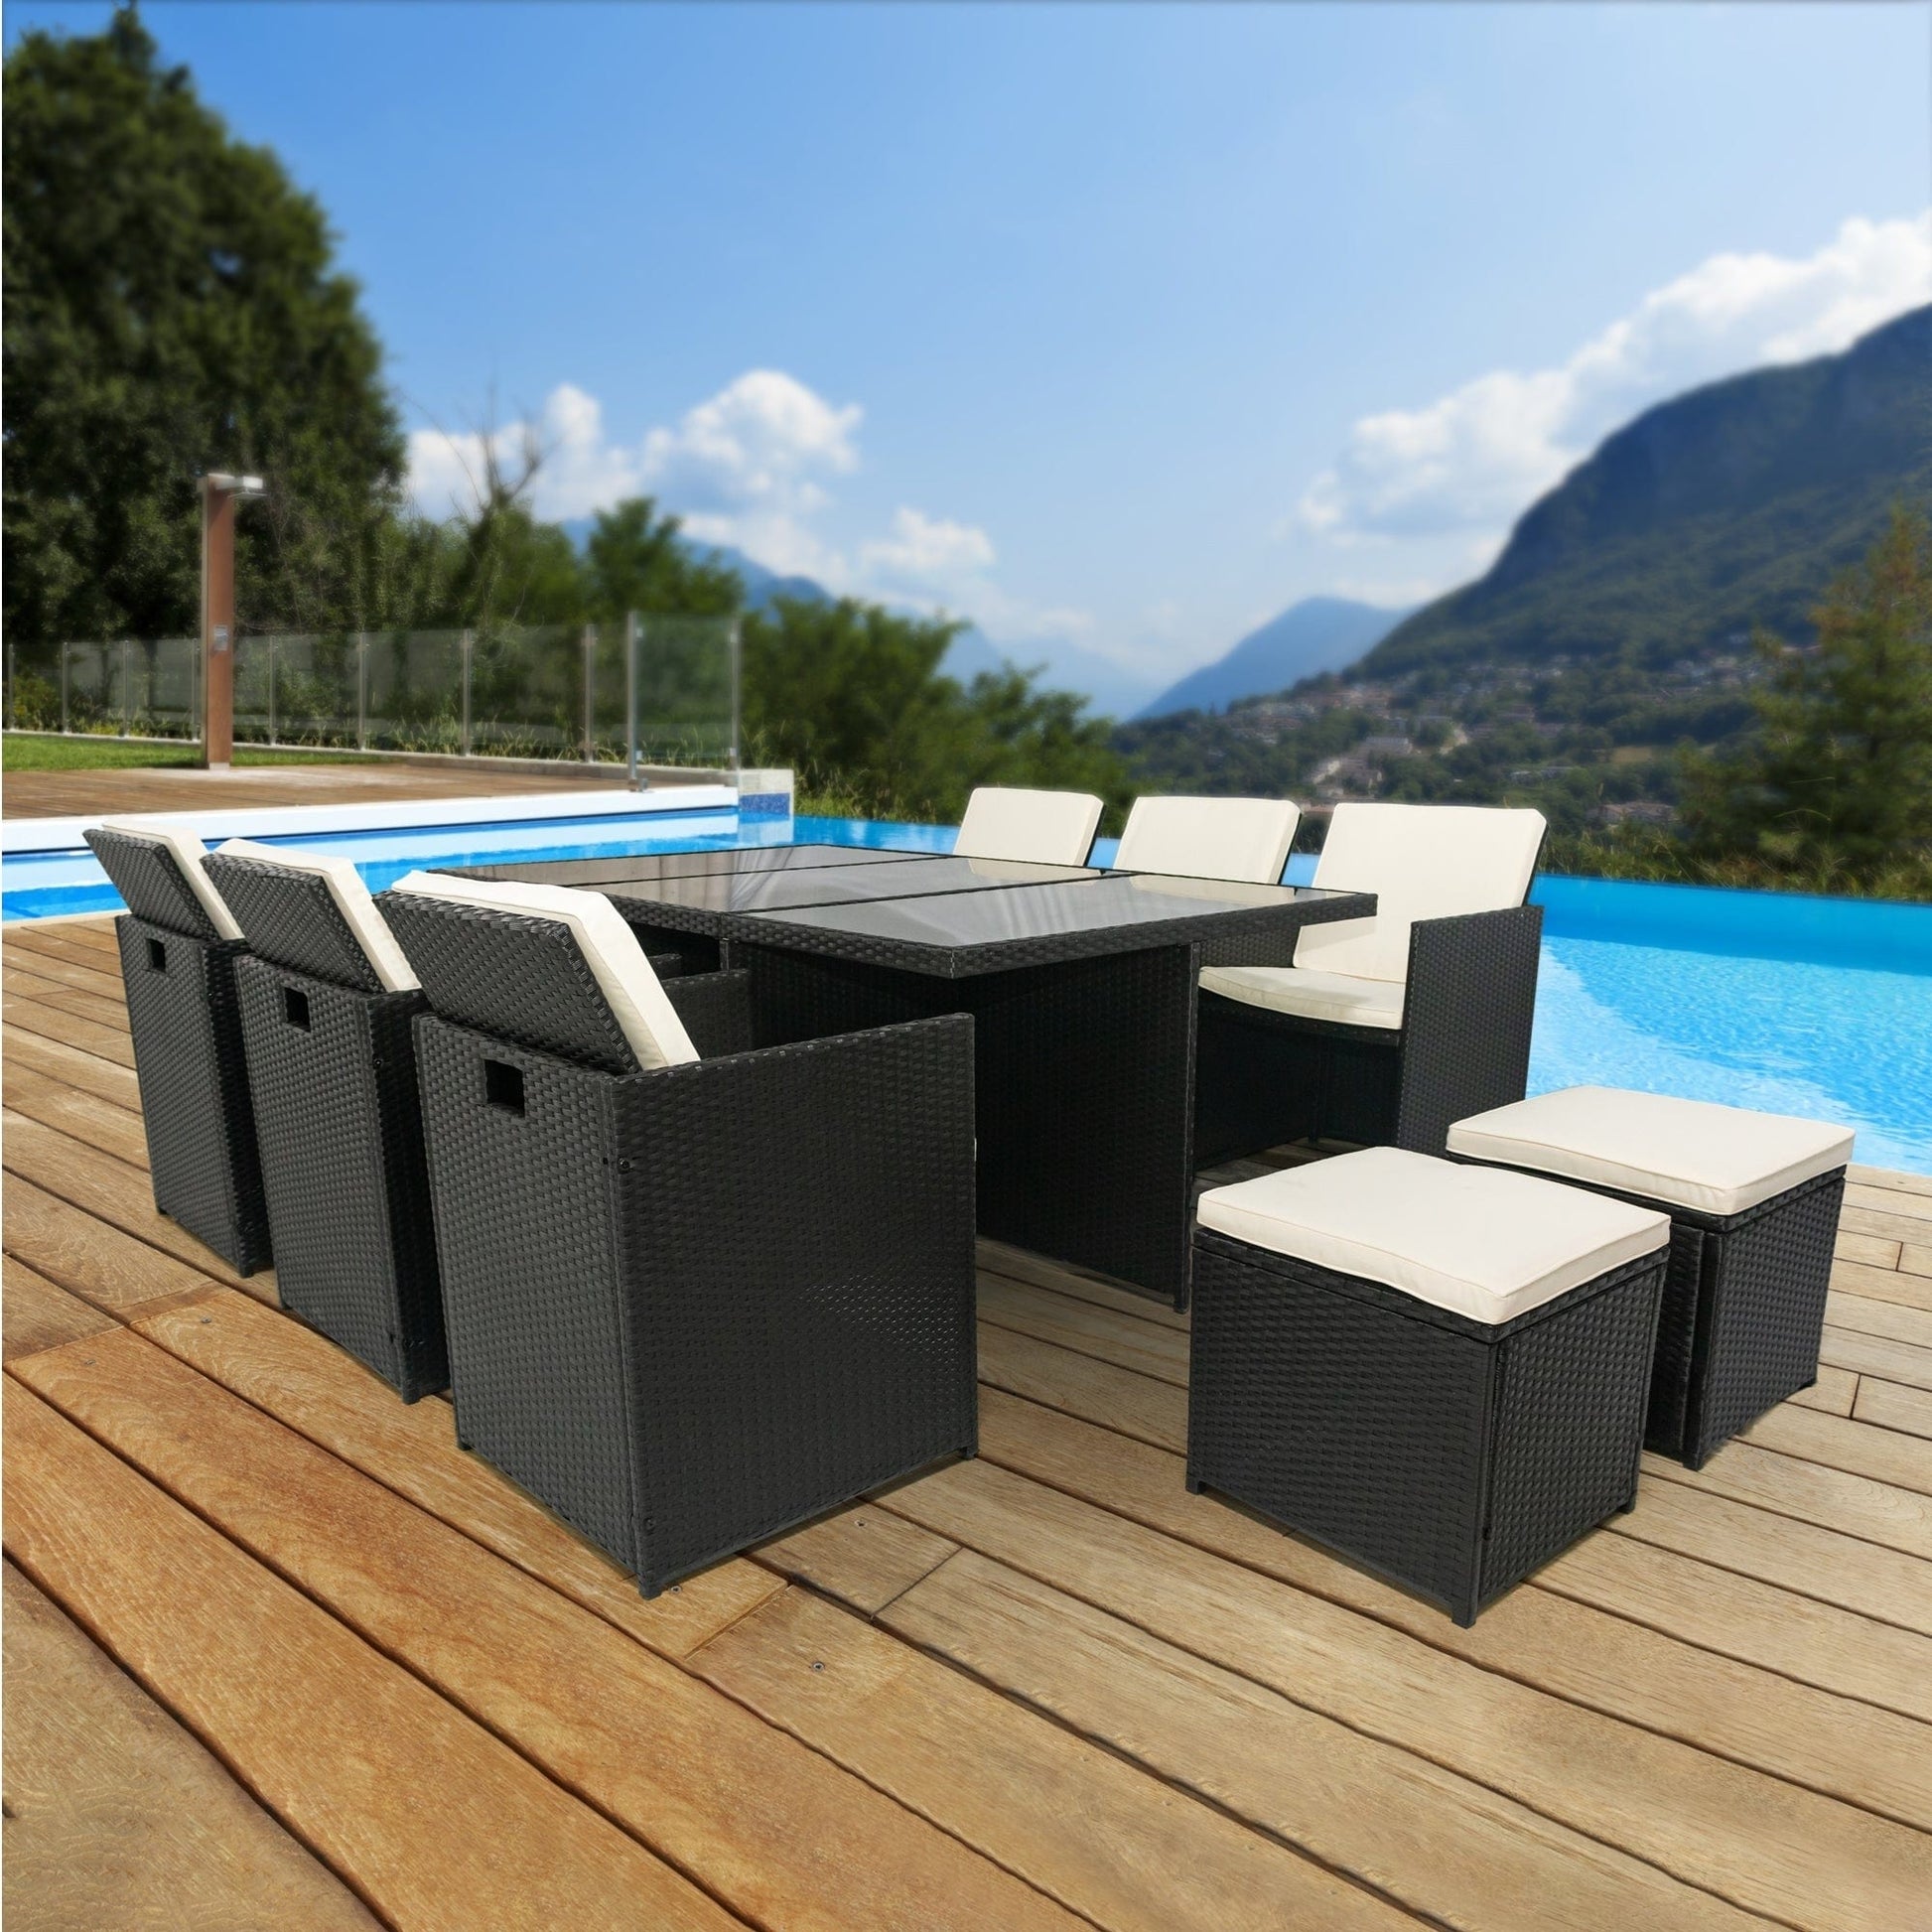 1st Choice Furniture Direct Patio Dining Set 1st Choice Black 11-Piece Outdoor Dining Furniture Set w/ Glass Table